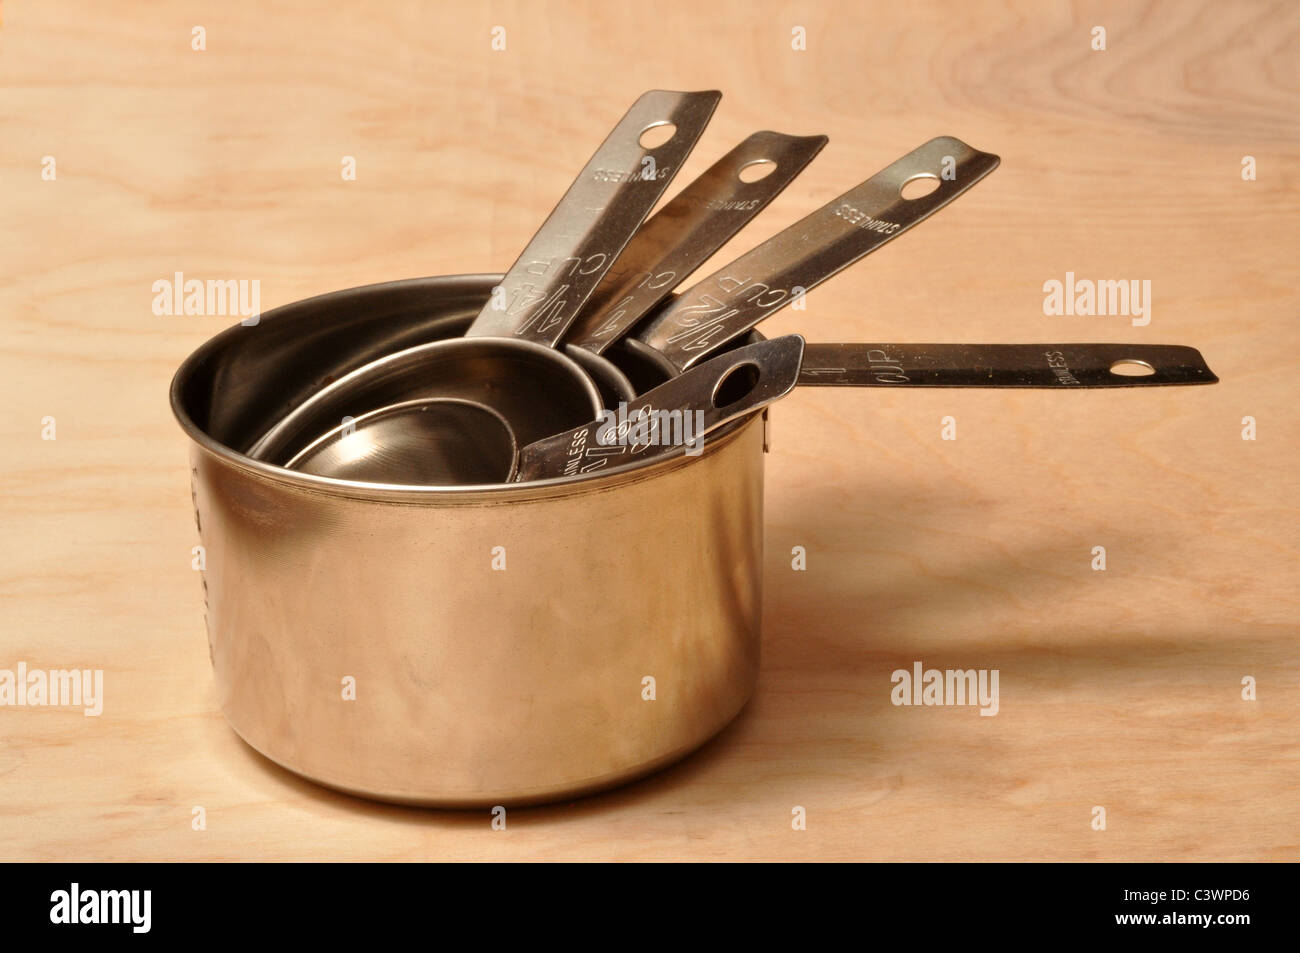 Aluminum Metal Silver Measuring Cups Stock Photo - Download Image Now - Dry  Measure, Measuring Cup, Metal - iStock